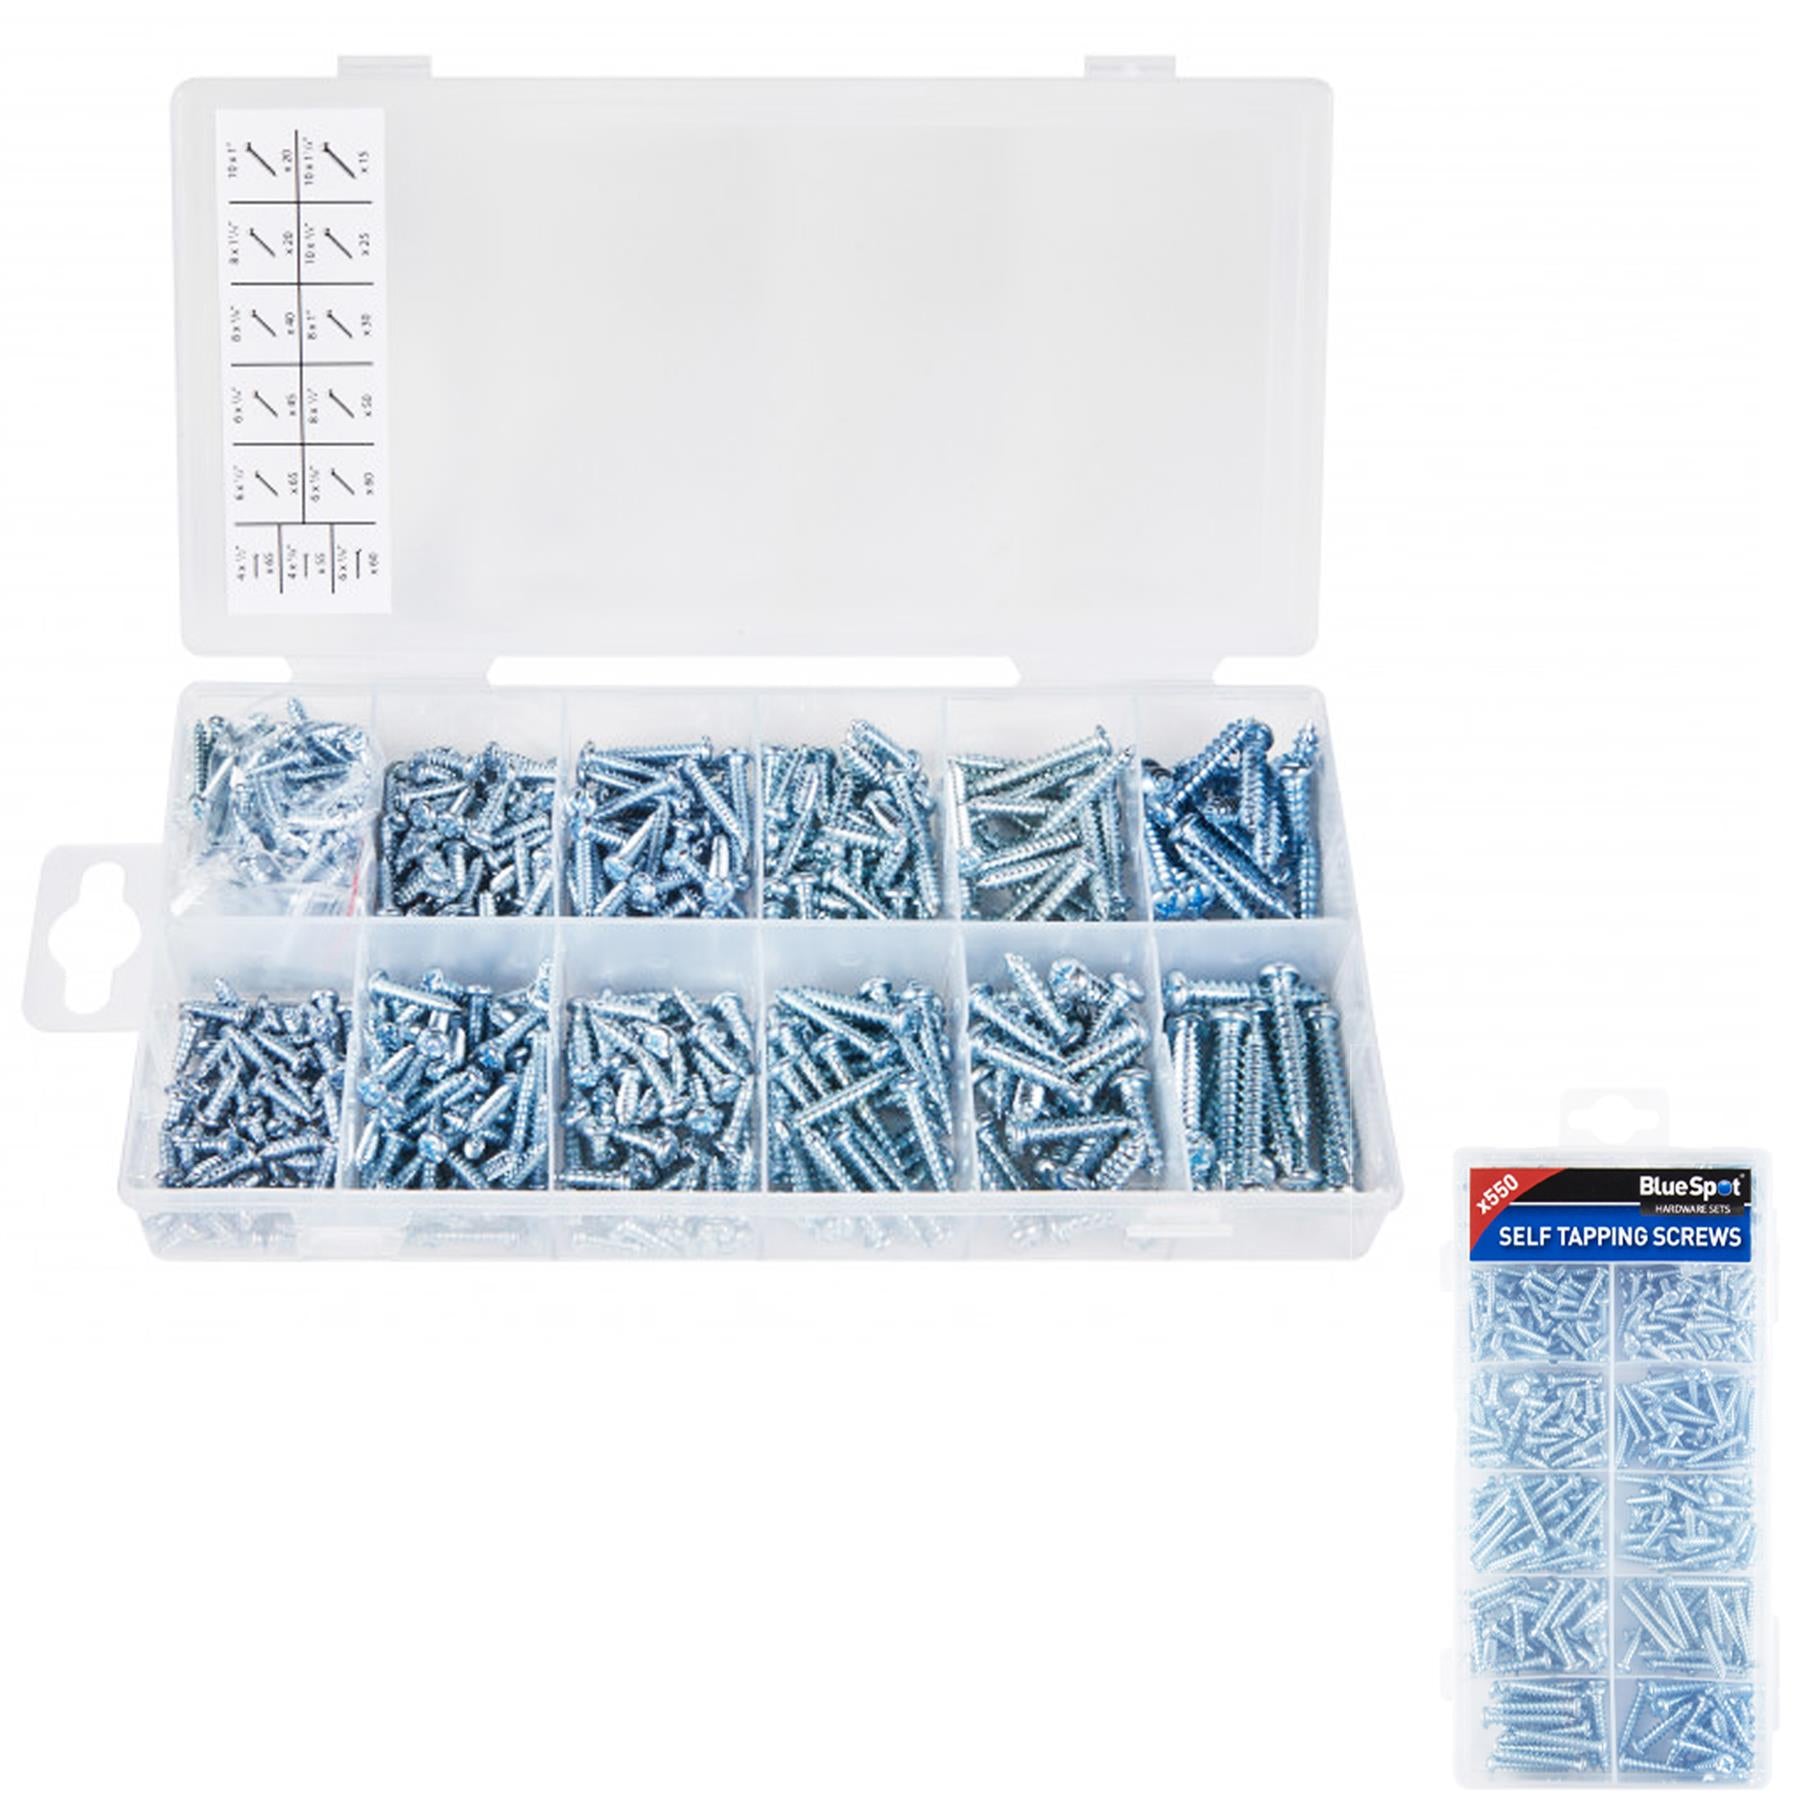 550 Assorted Screws multi sizes. Self Tapping Philips/Slotted Combo Screws